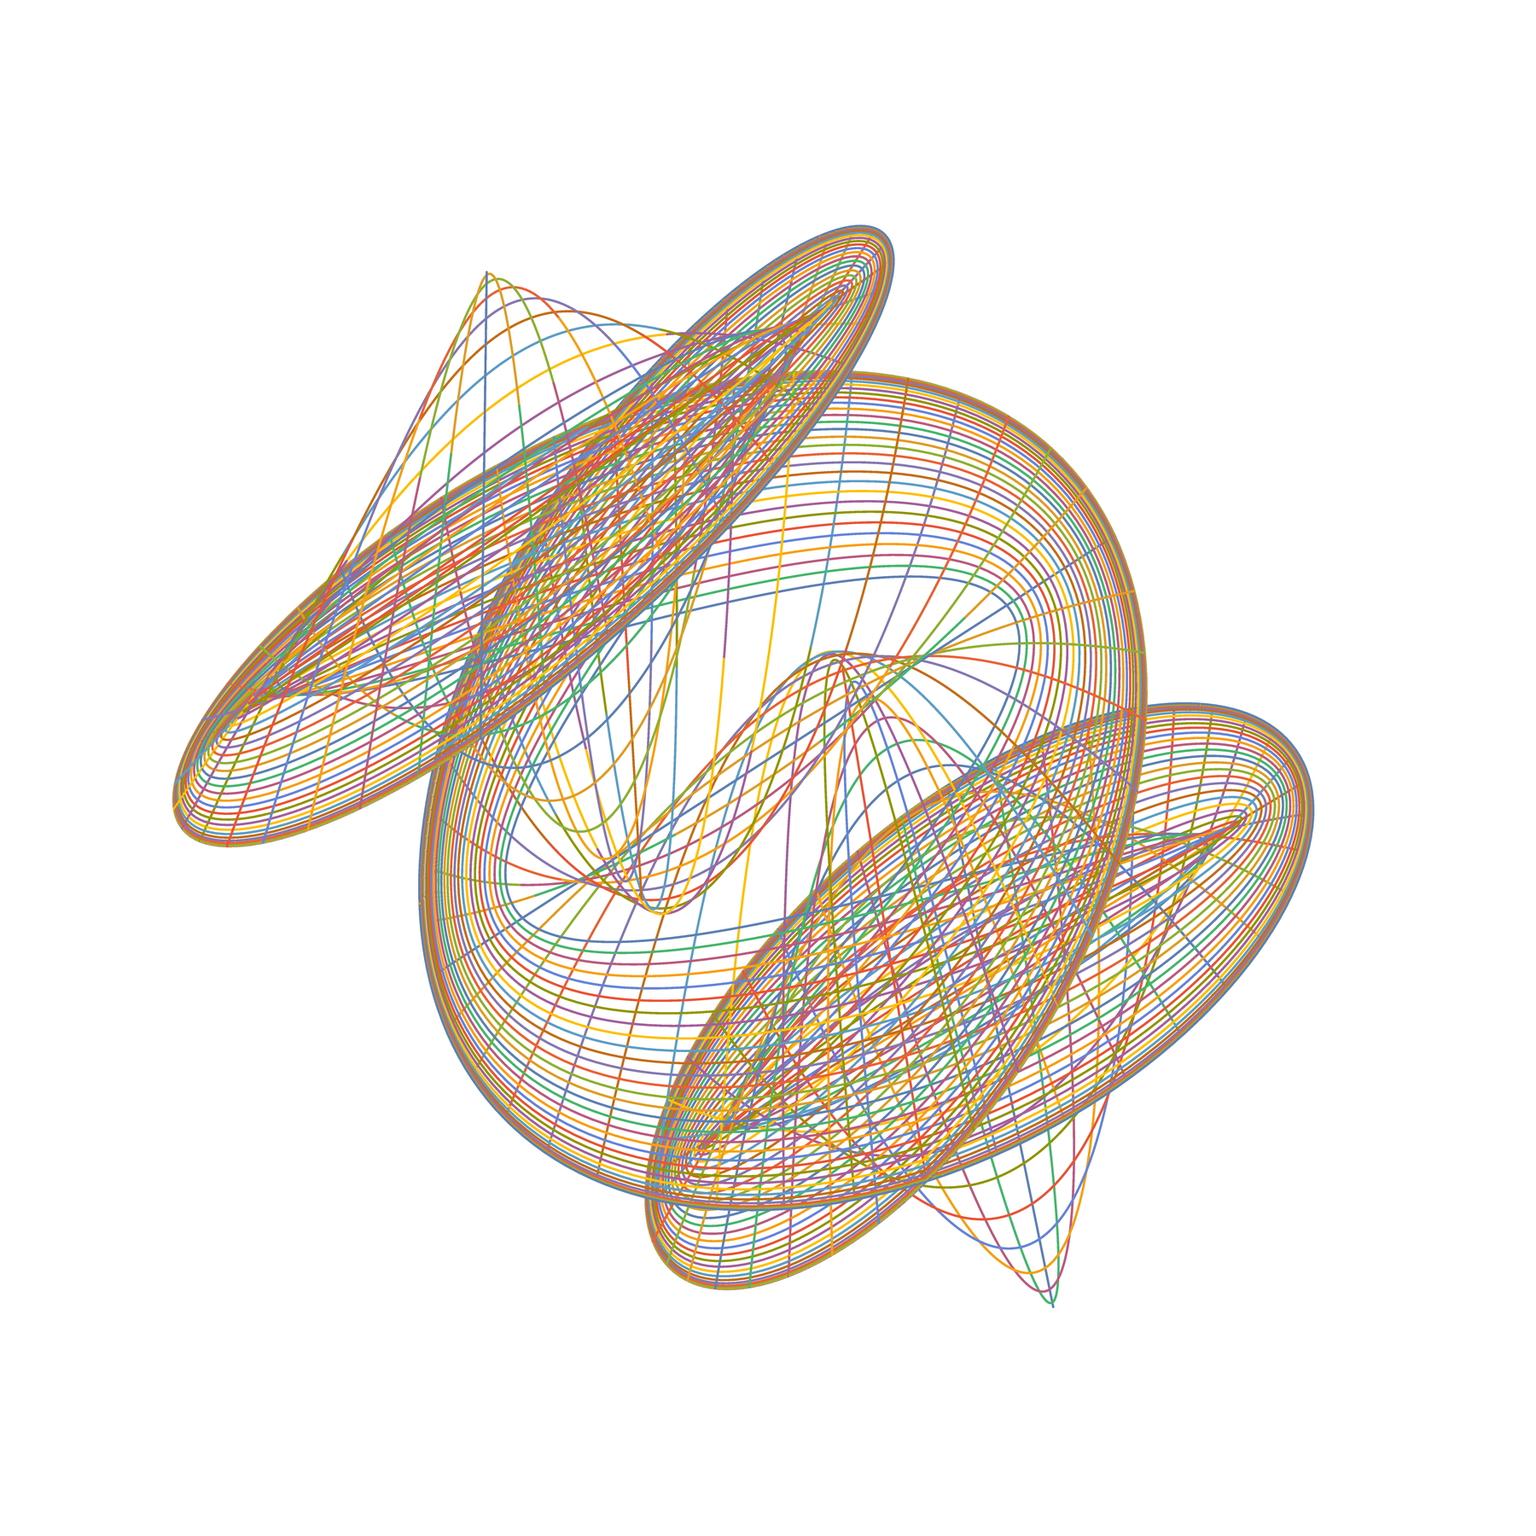 Image for entry 'Parabolic Suspension Spindels in a Closed Spiral'